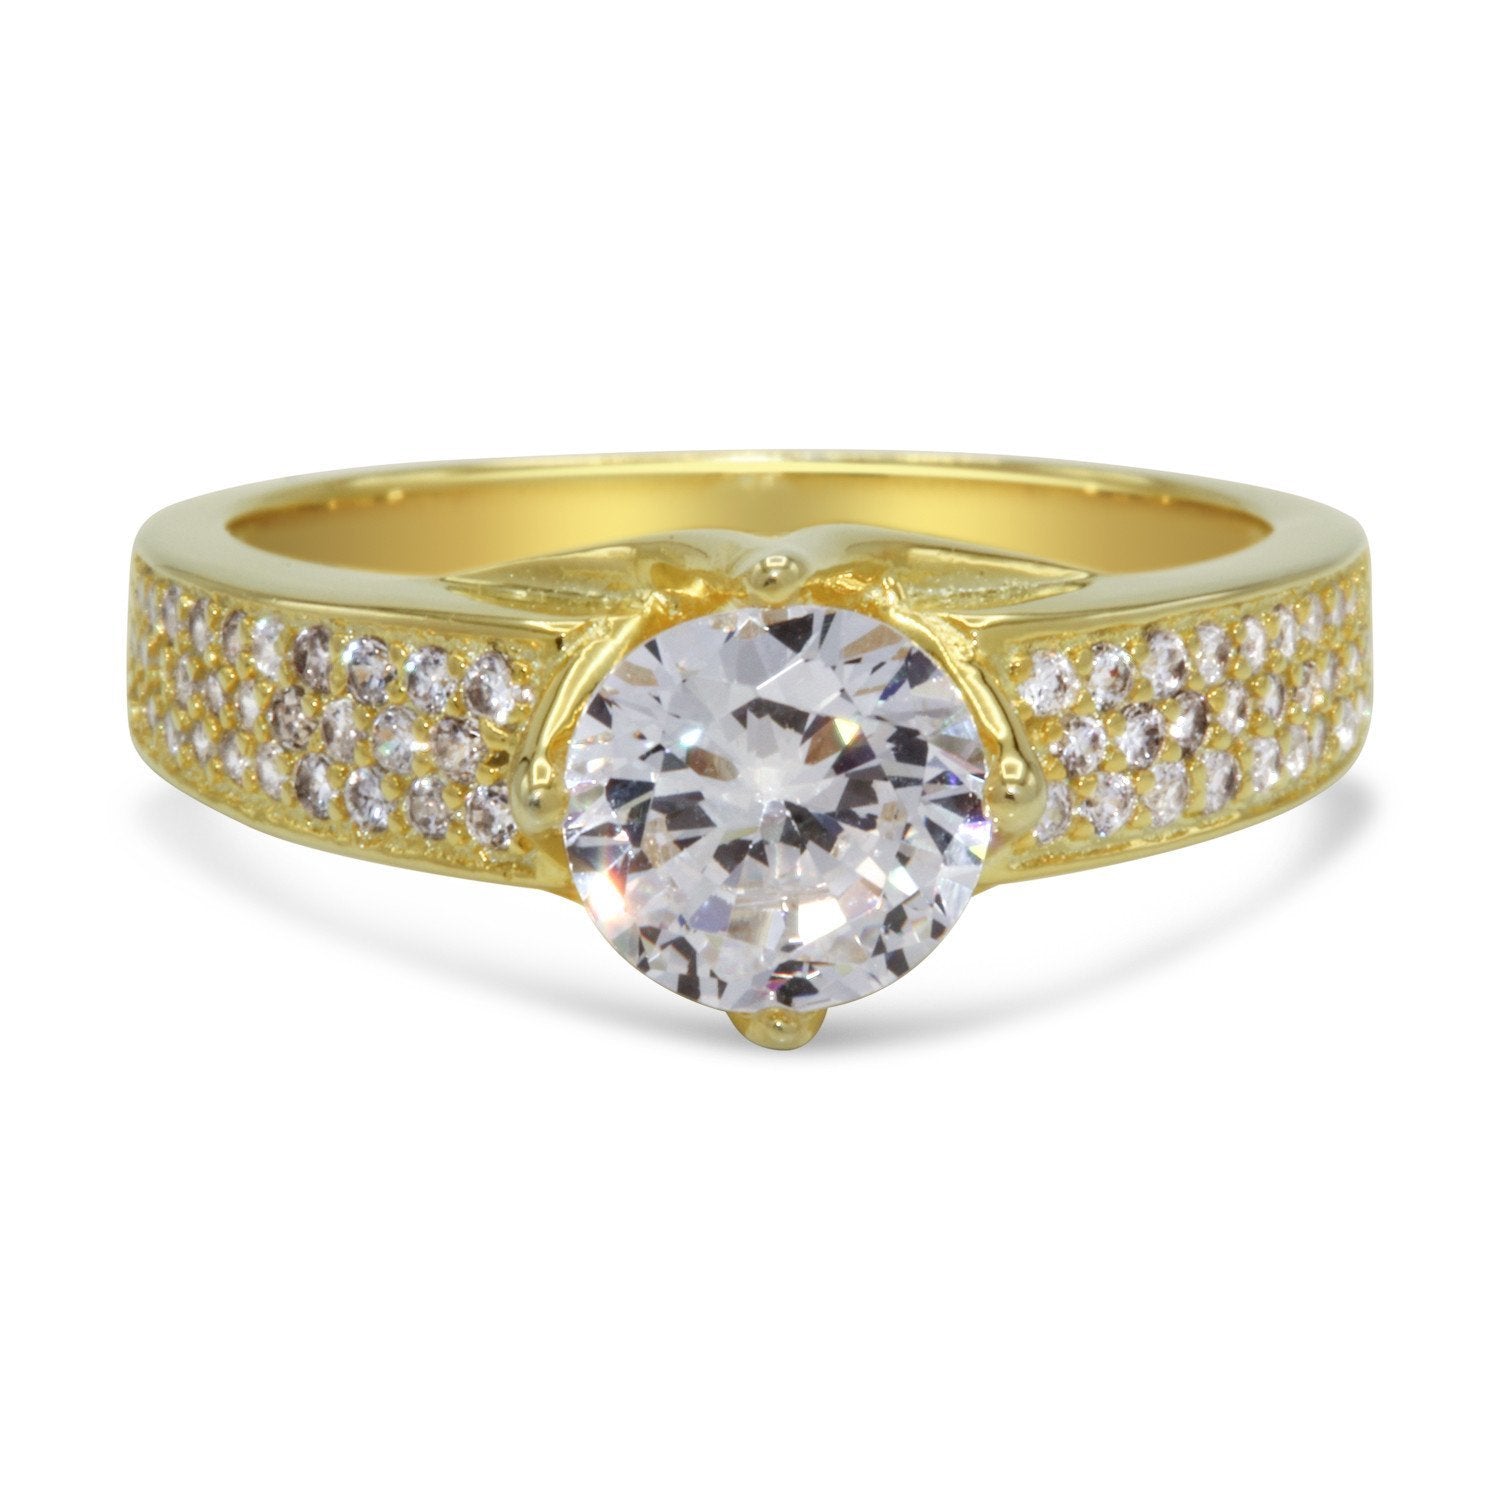 CZ 7mm Sterling Silver Gold Plated Crossover Halo Engagement Ring